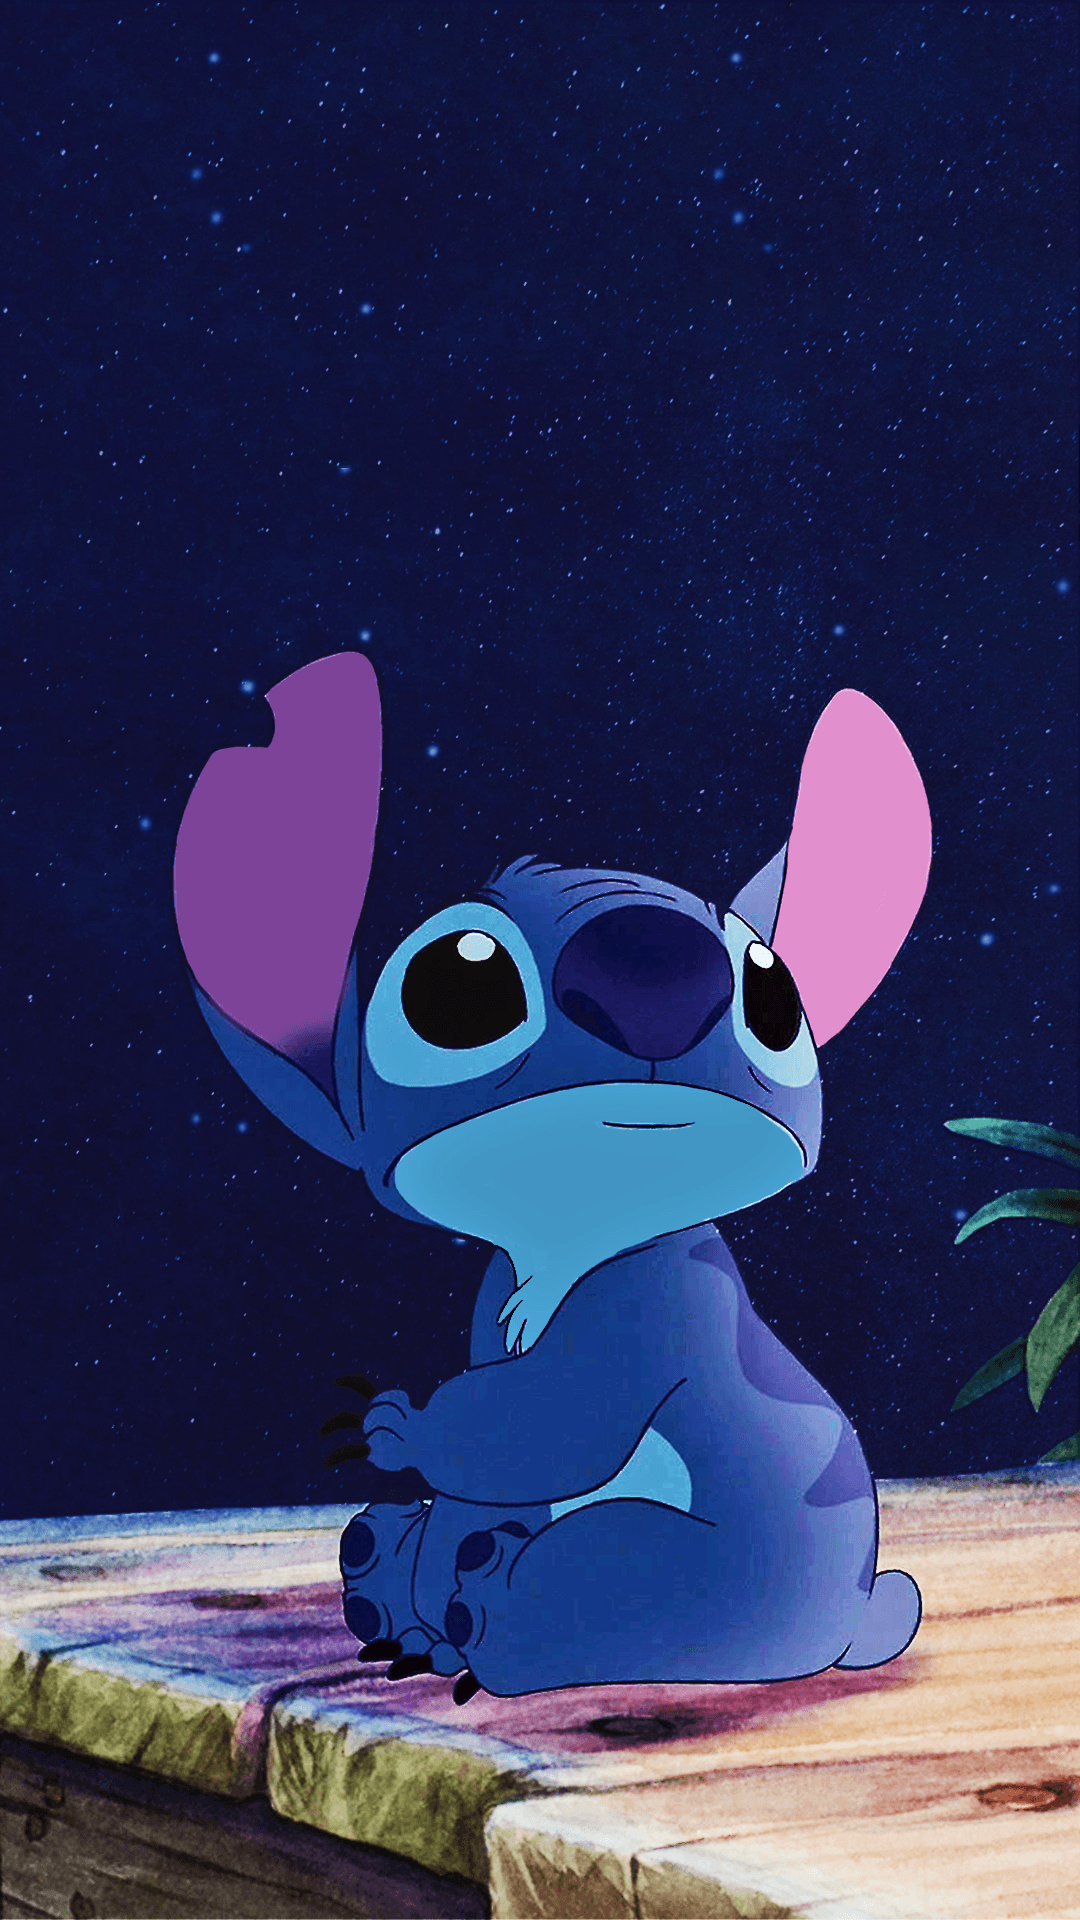 Quotes From Lilo And Stitch QuotesGram